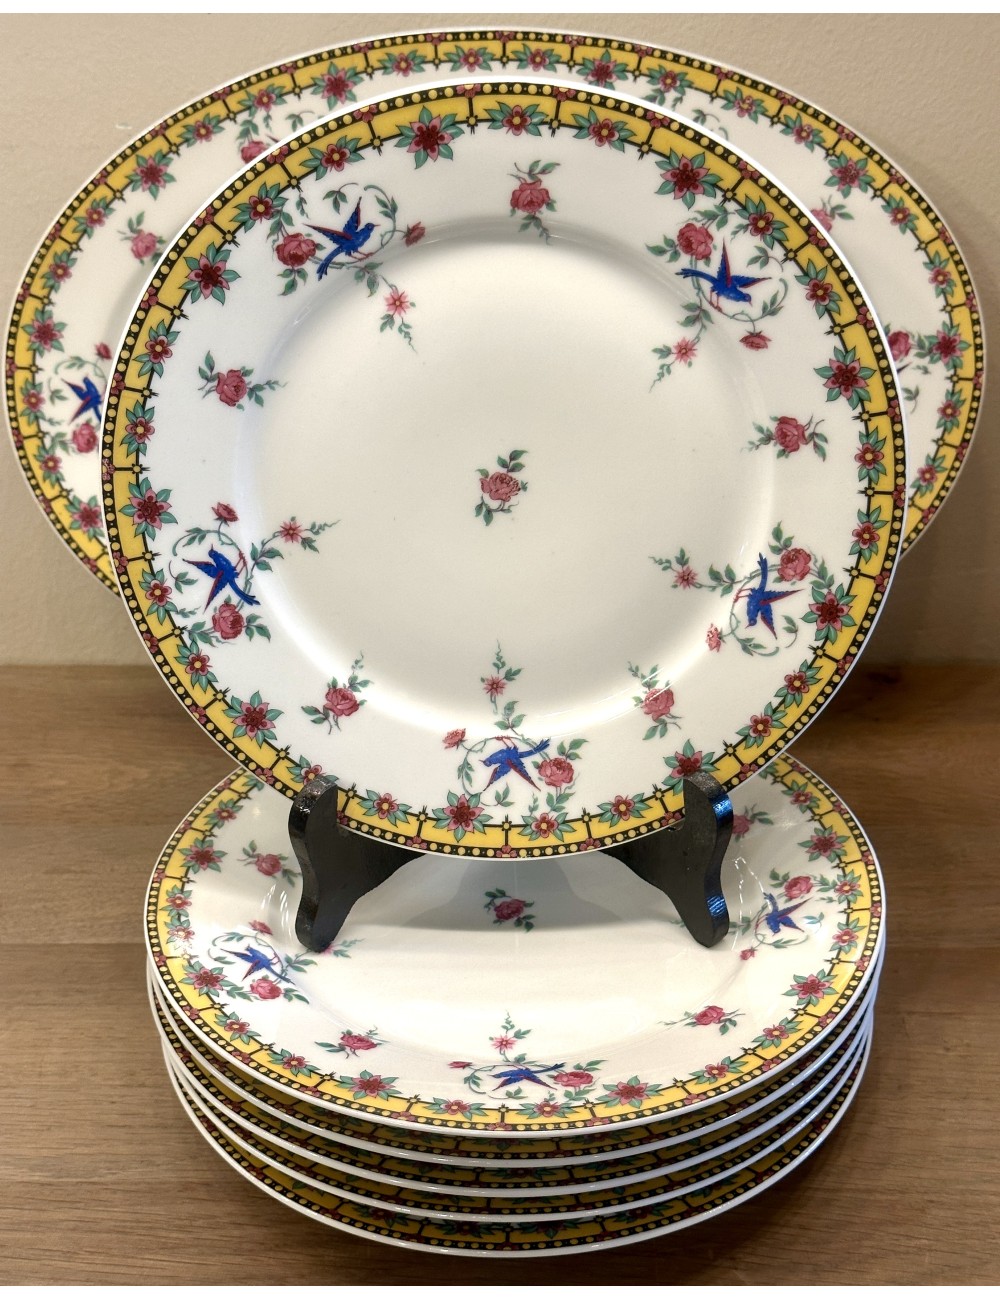 Breakfast plate / Dessert plate - Limoges B & Cie (Balleroy) - décor in yellow - made for/sold by A. Tytgad